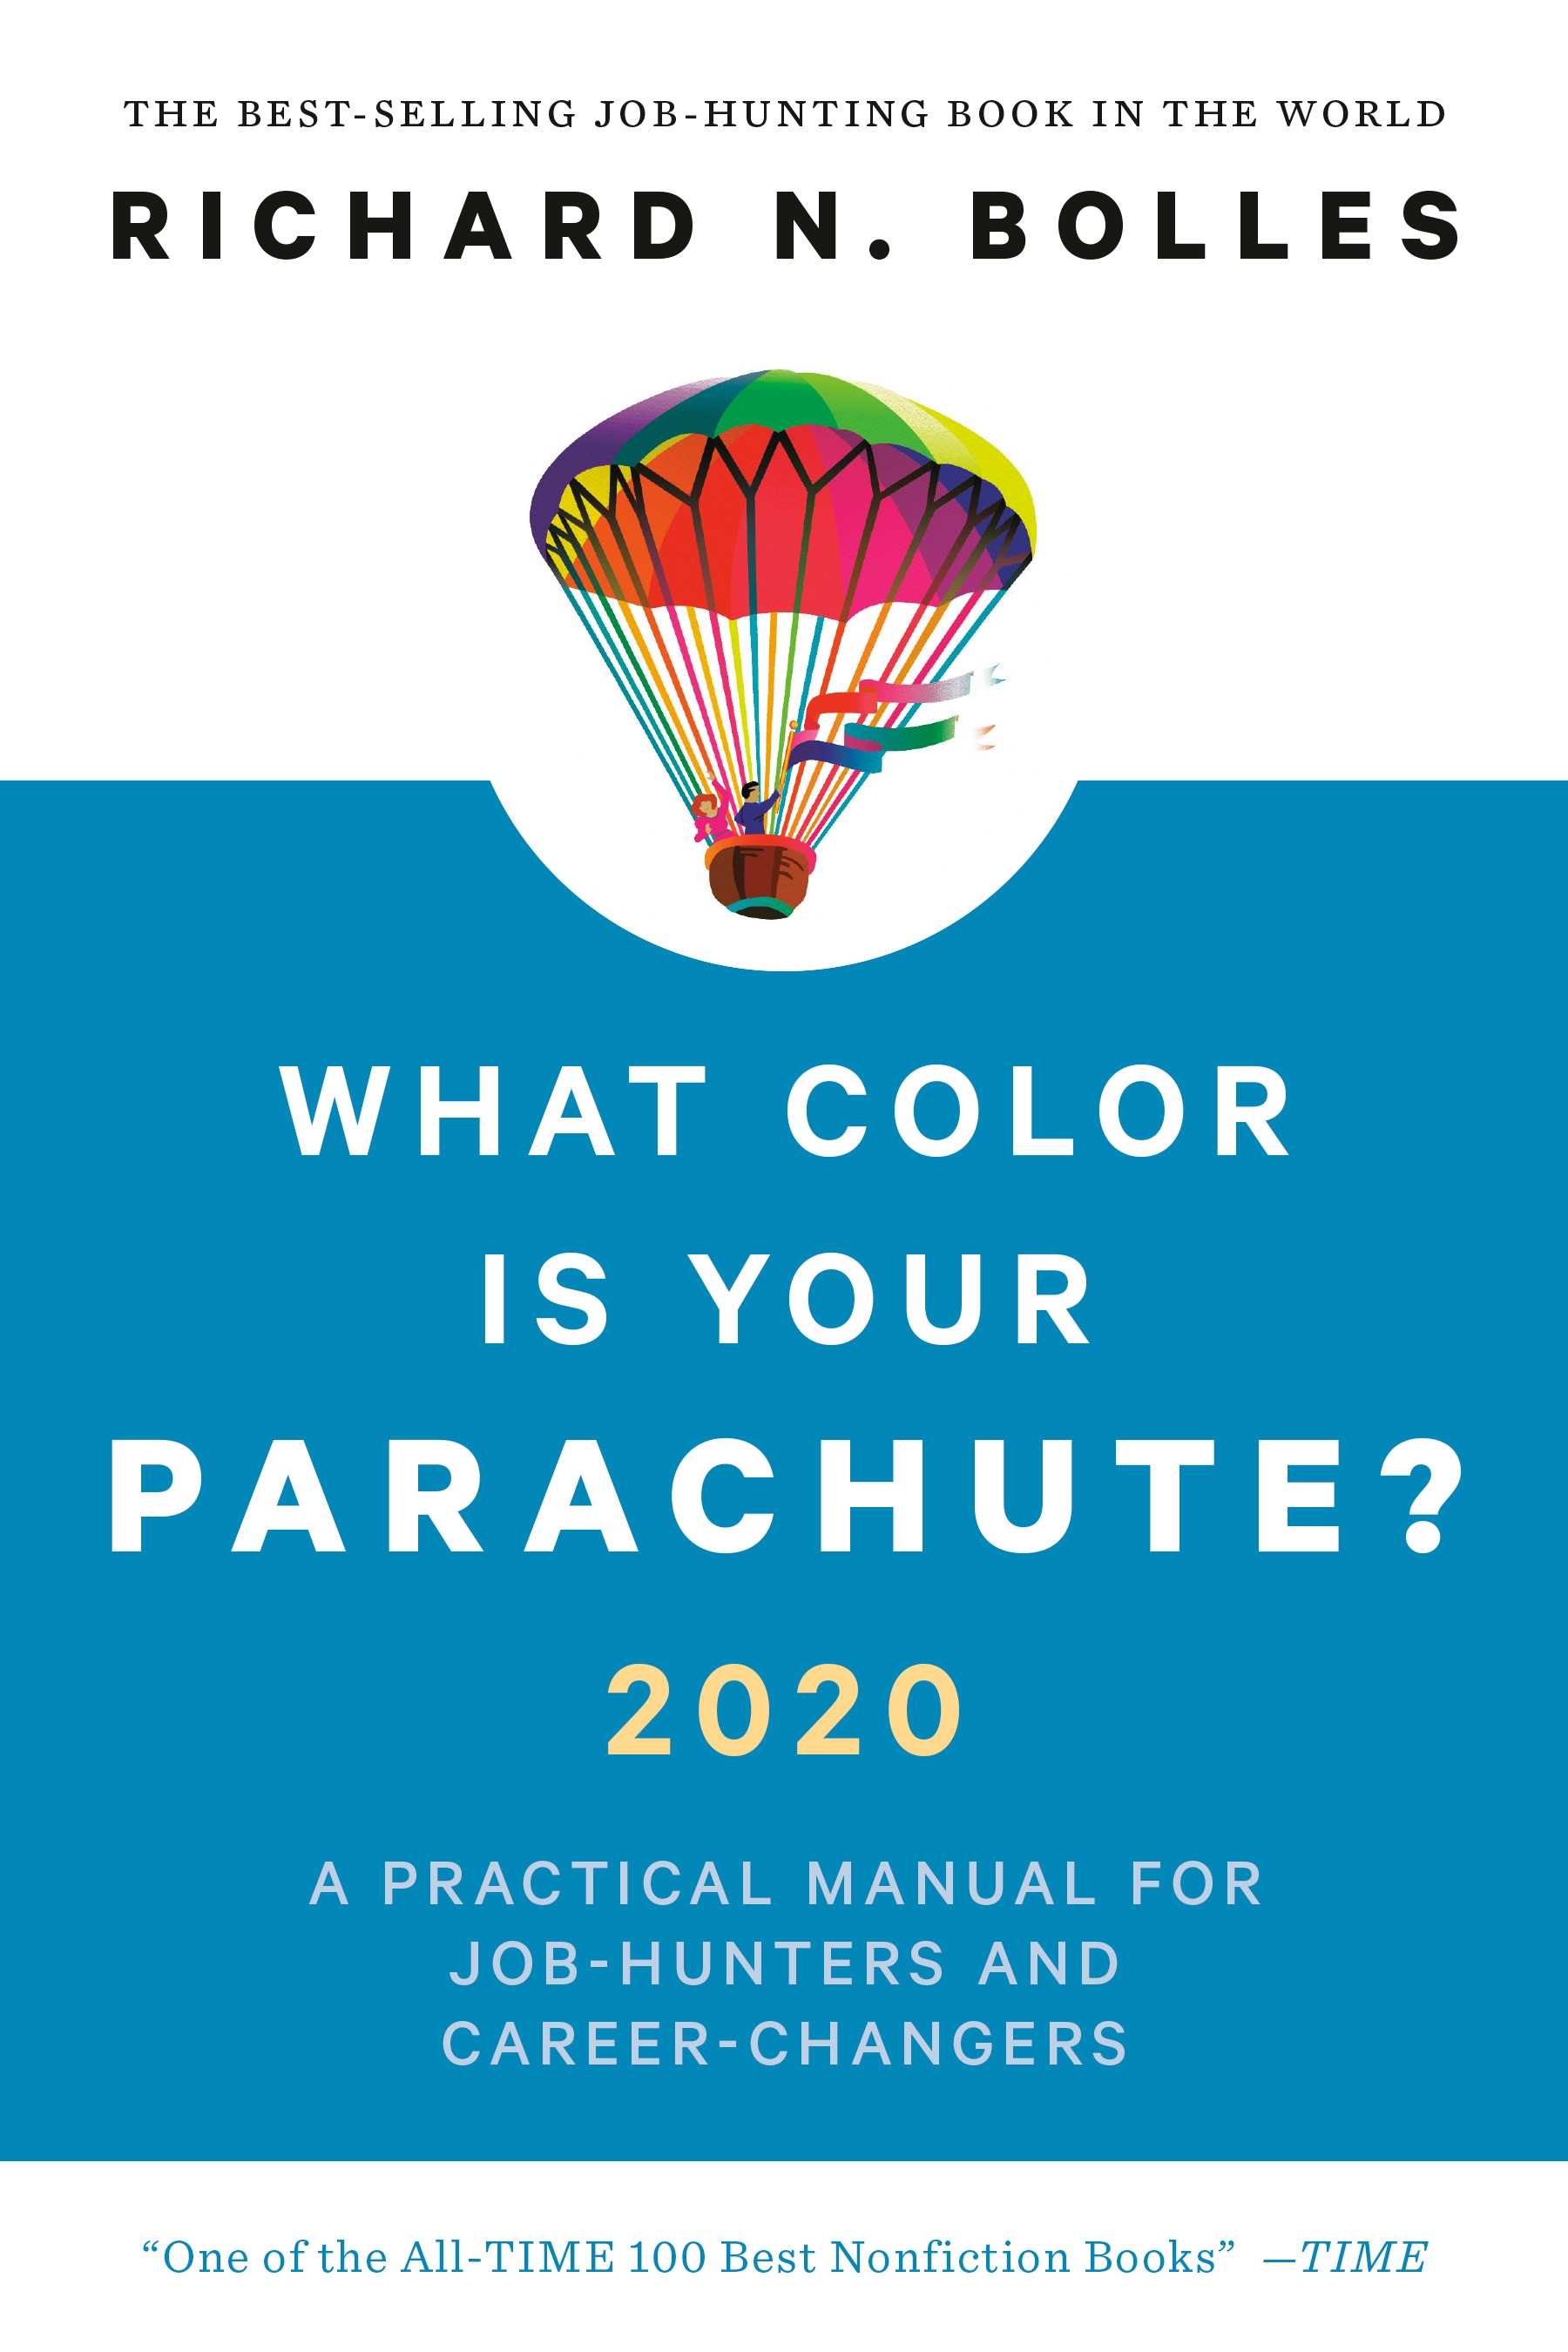 What Color Is Your Parachute? 2020 by Richard N. Bolles Penguin Books